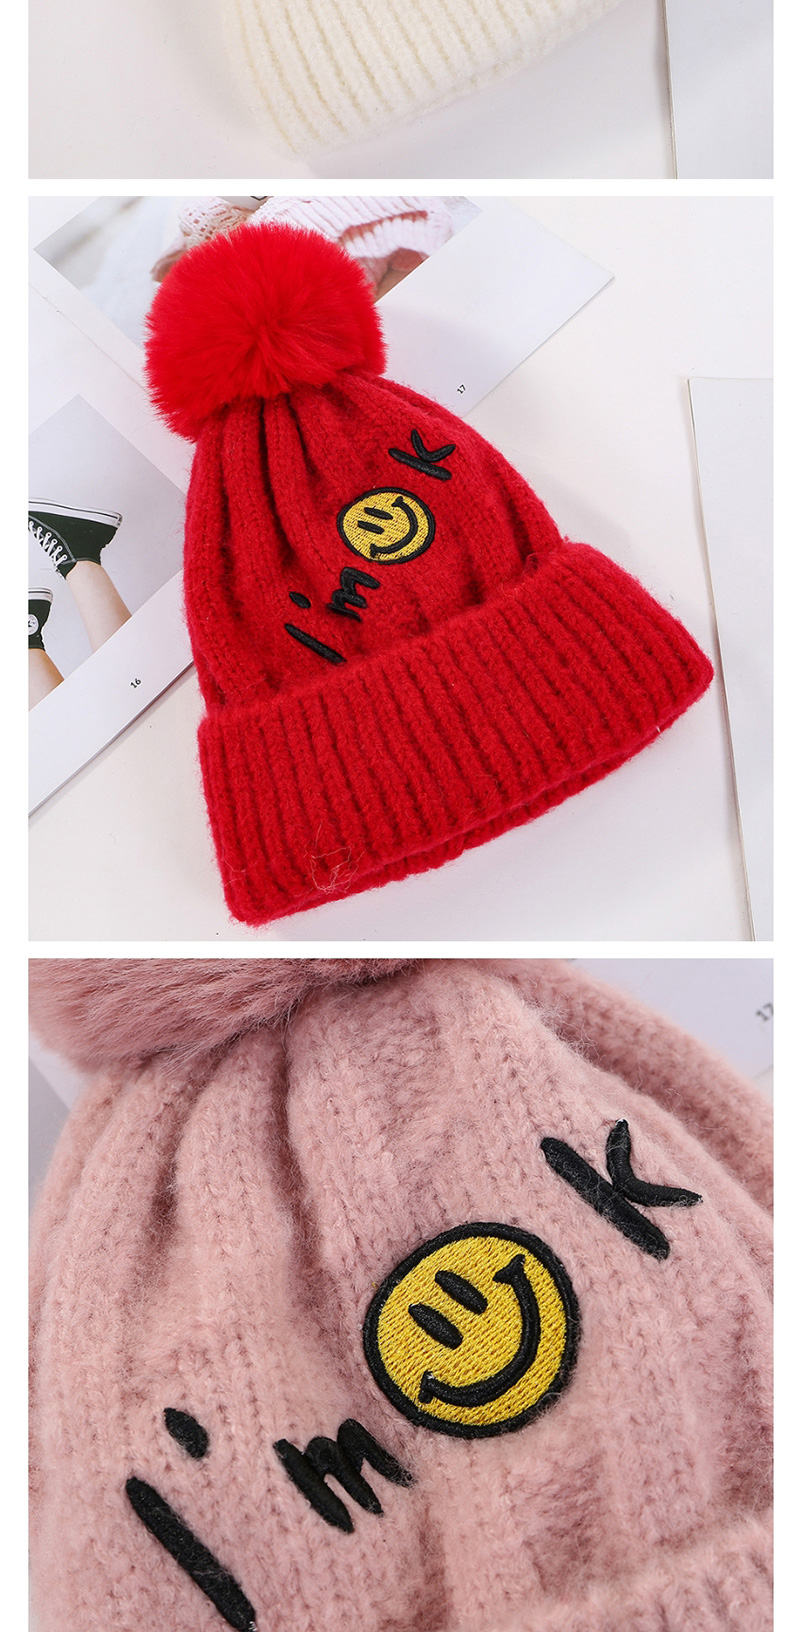 Fashion Black Embroidered Smiley Letters Plus Velvet Knitted Hat,Knitting Wool Hats